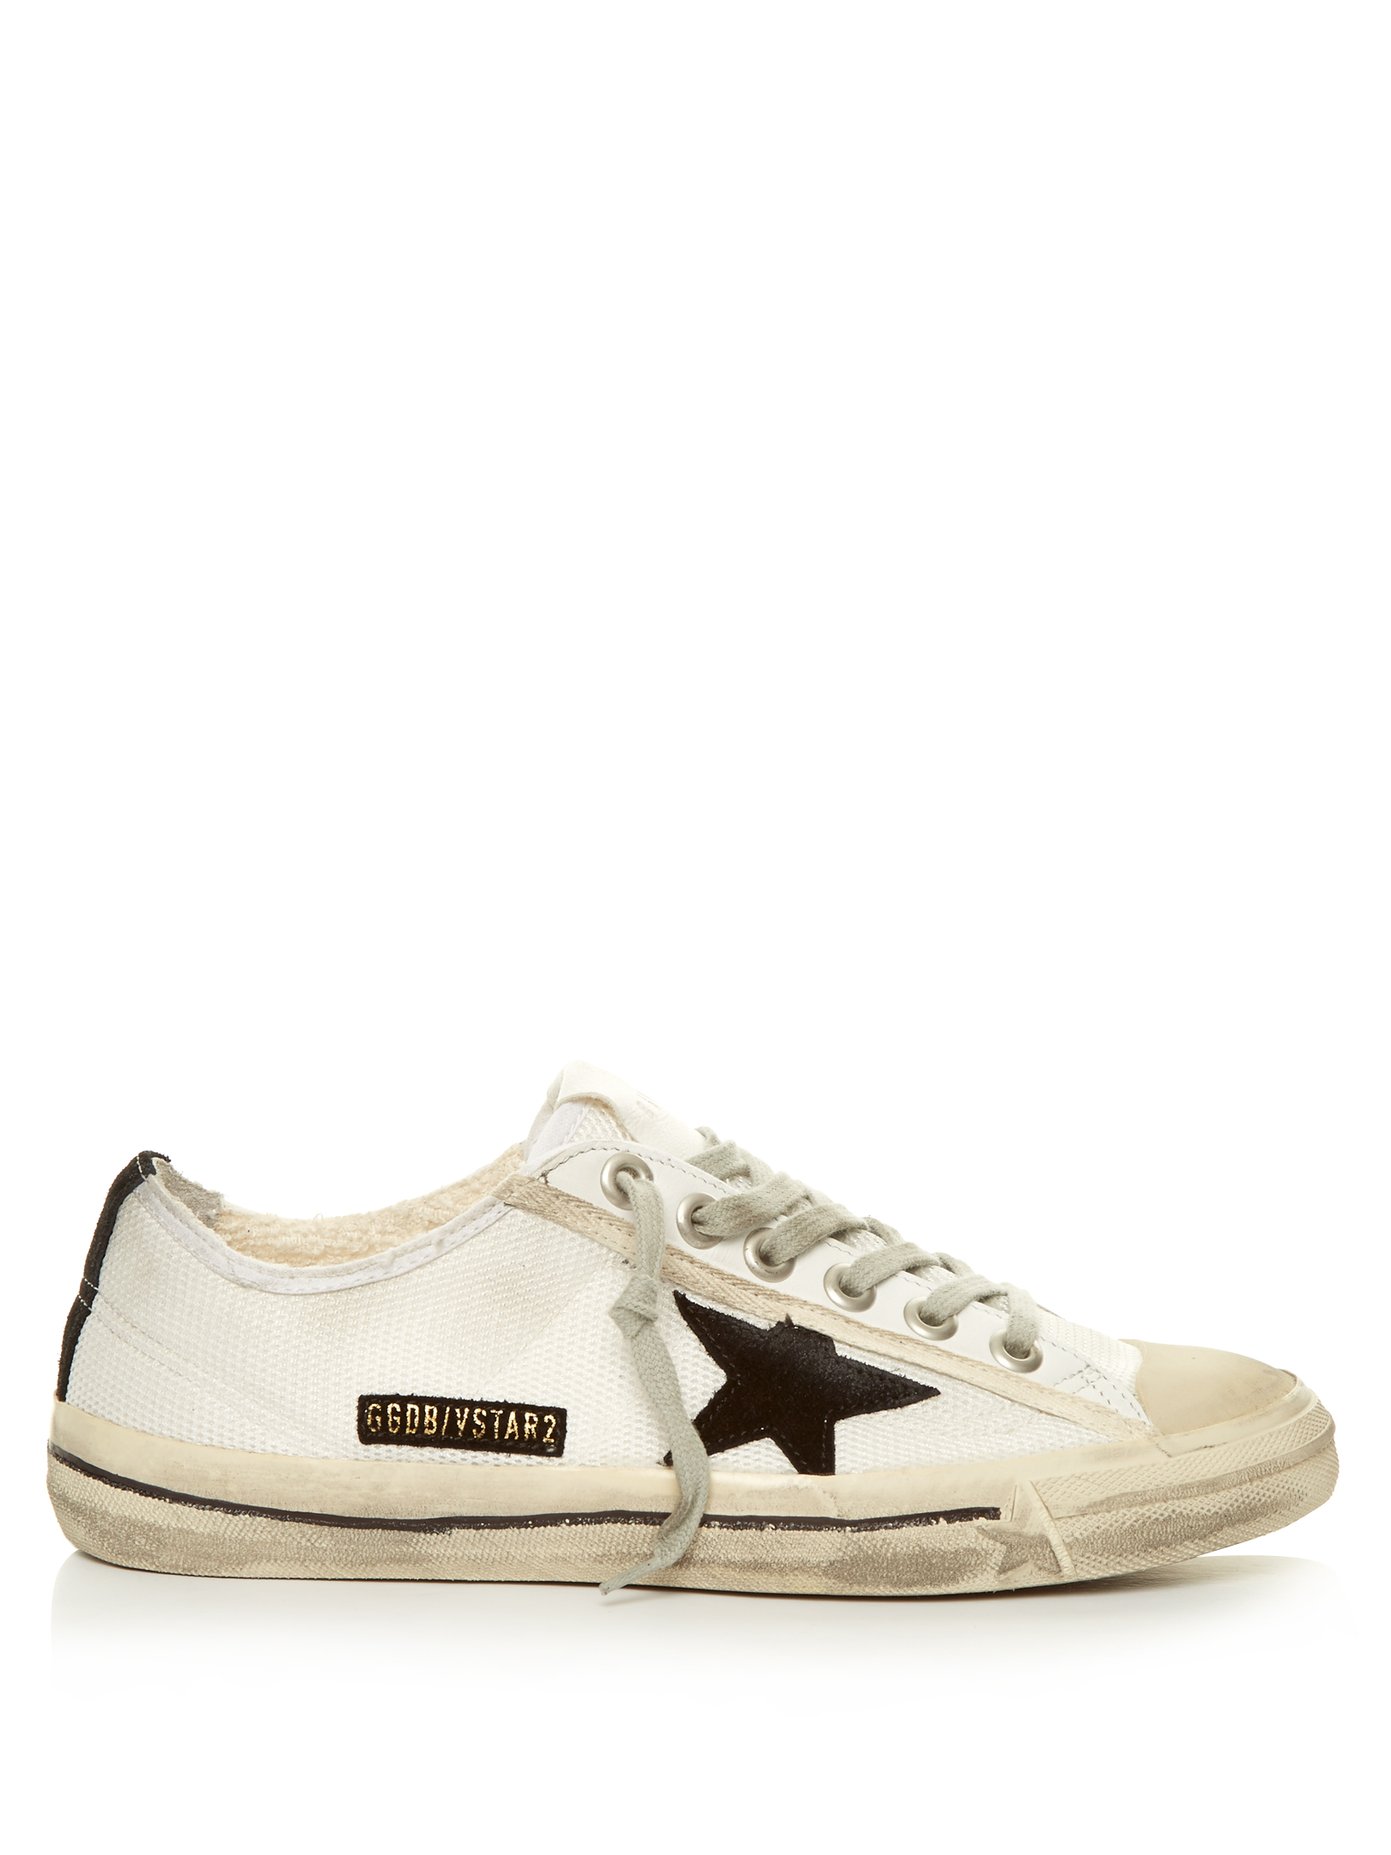 V-star low-top mesh trainers | Golden Goose | MATCHESFASHION KR